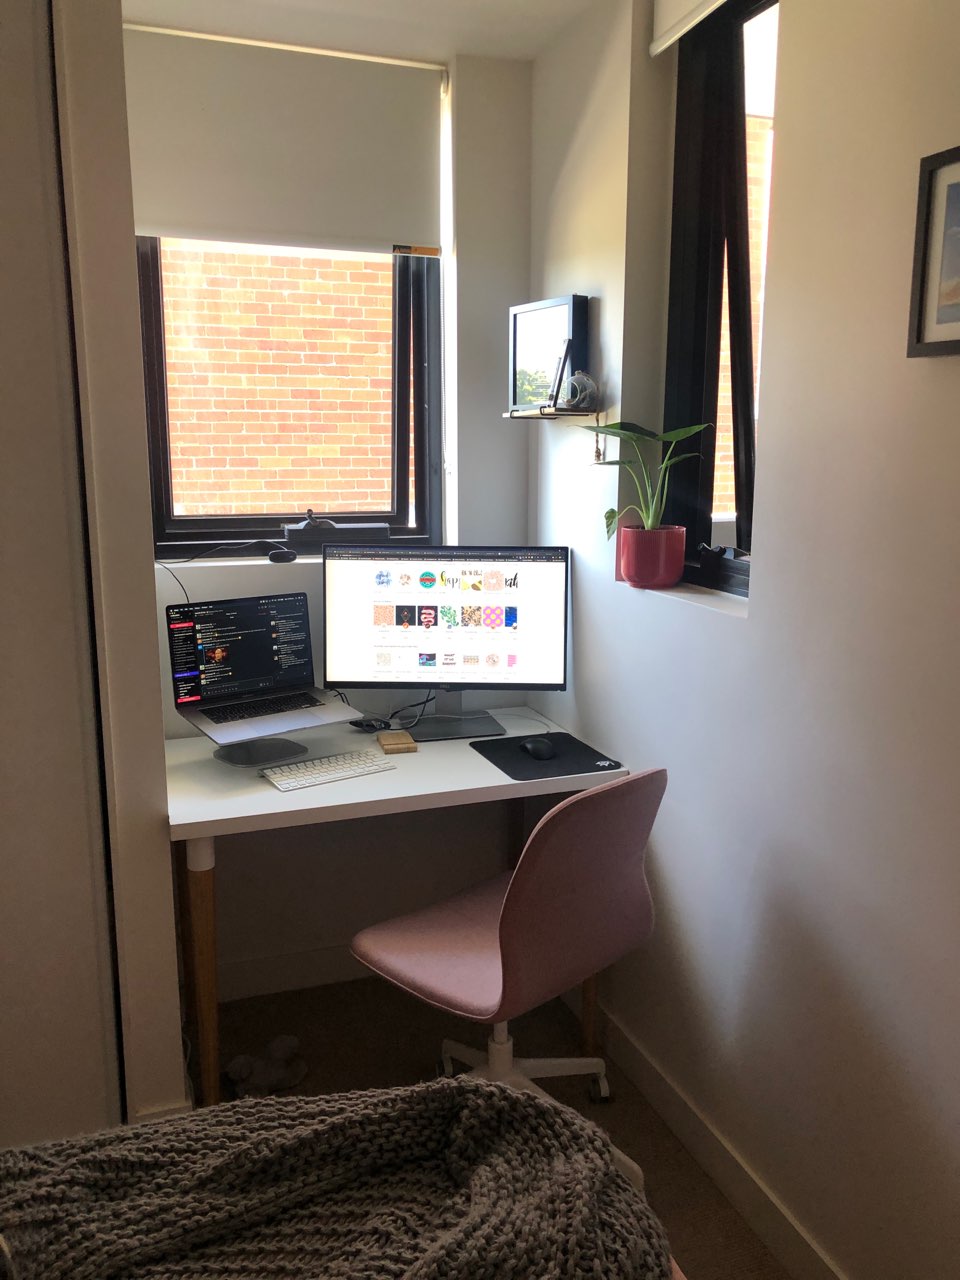 A small desk set up in front of a window looking out onto a brick wall.